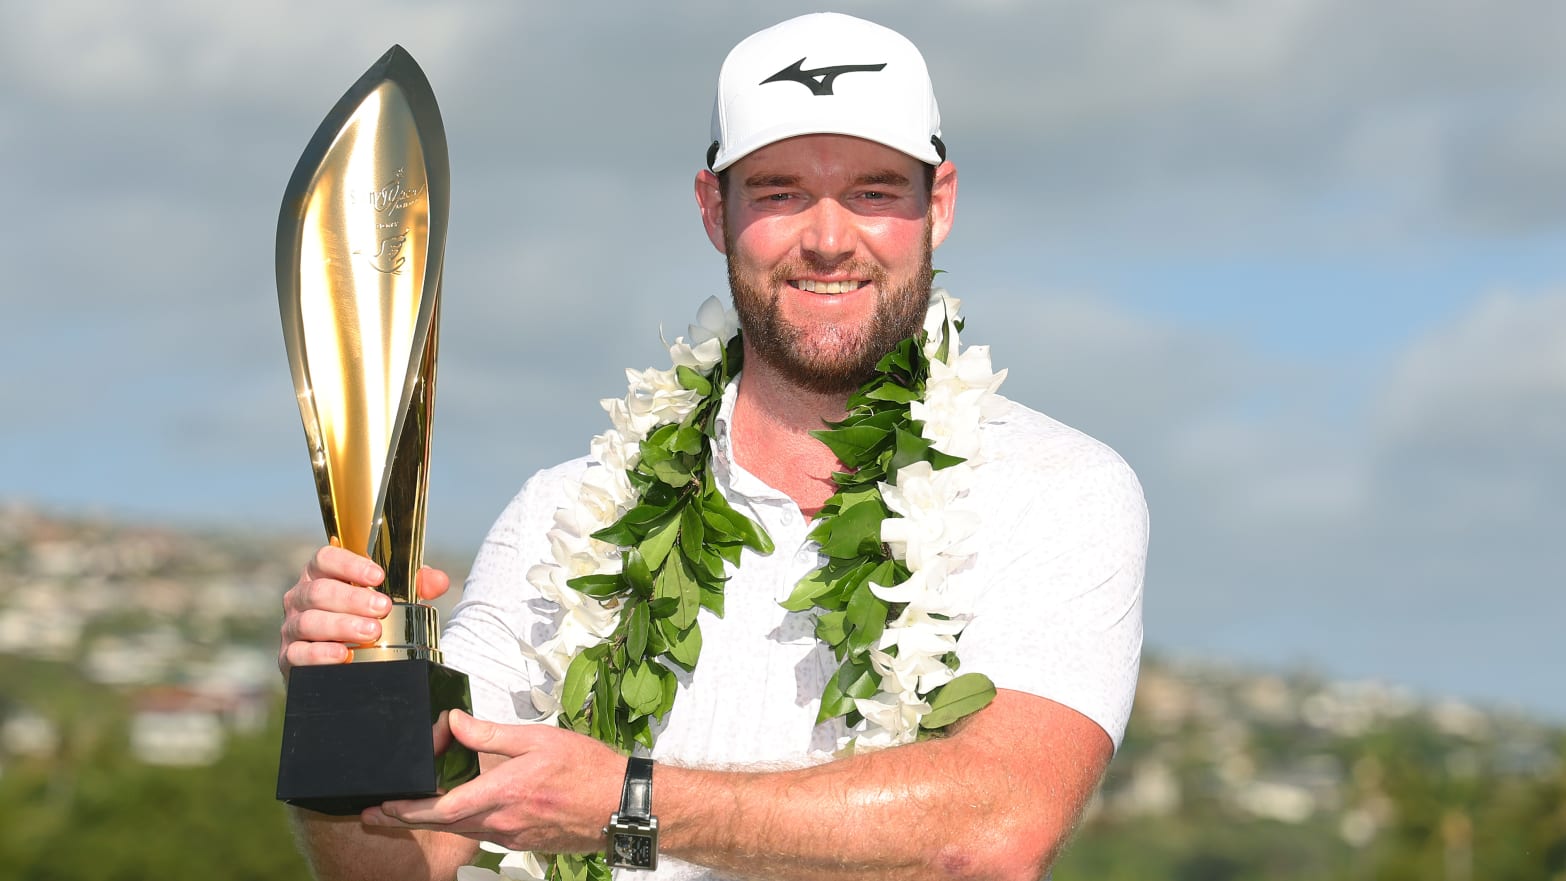 Grayson Murray of the United States poses with the trophy after winning the Sony Open in Hawaii in January.